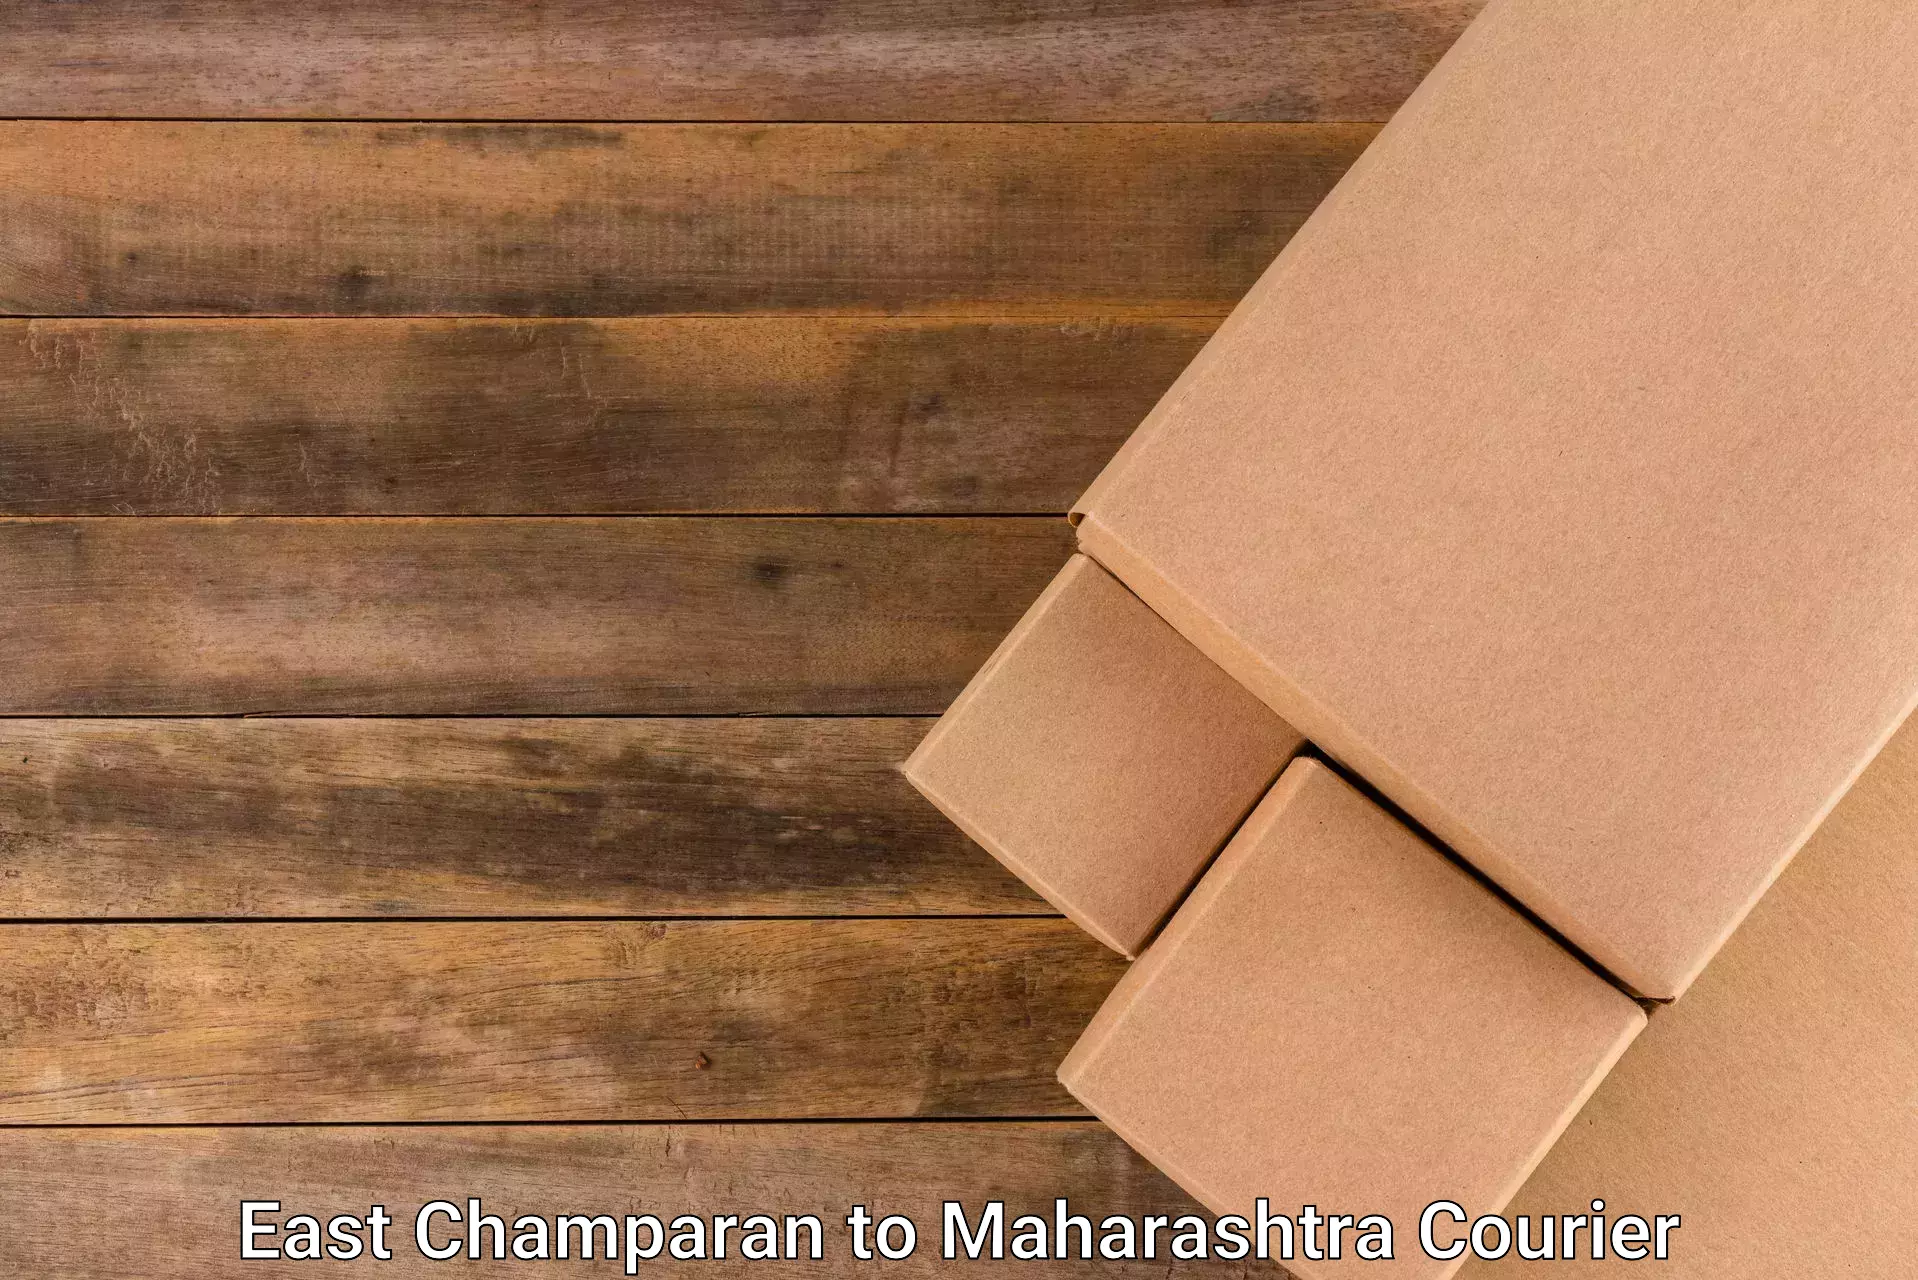 Express delivery network East Champaran to Maharashtra